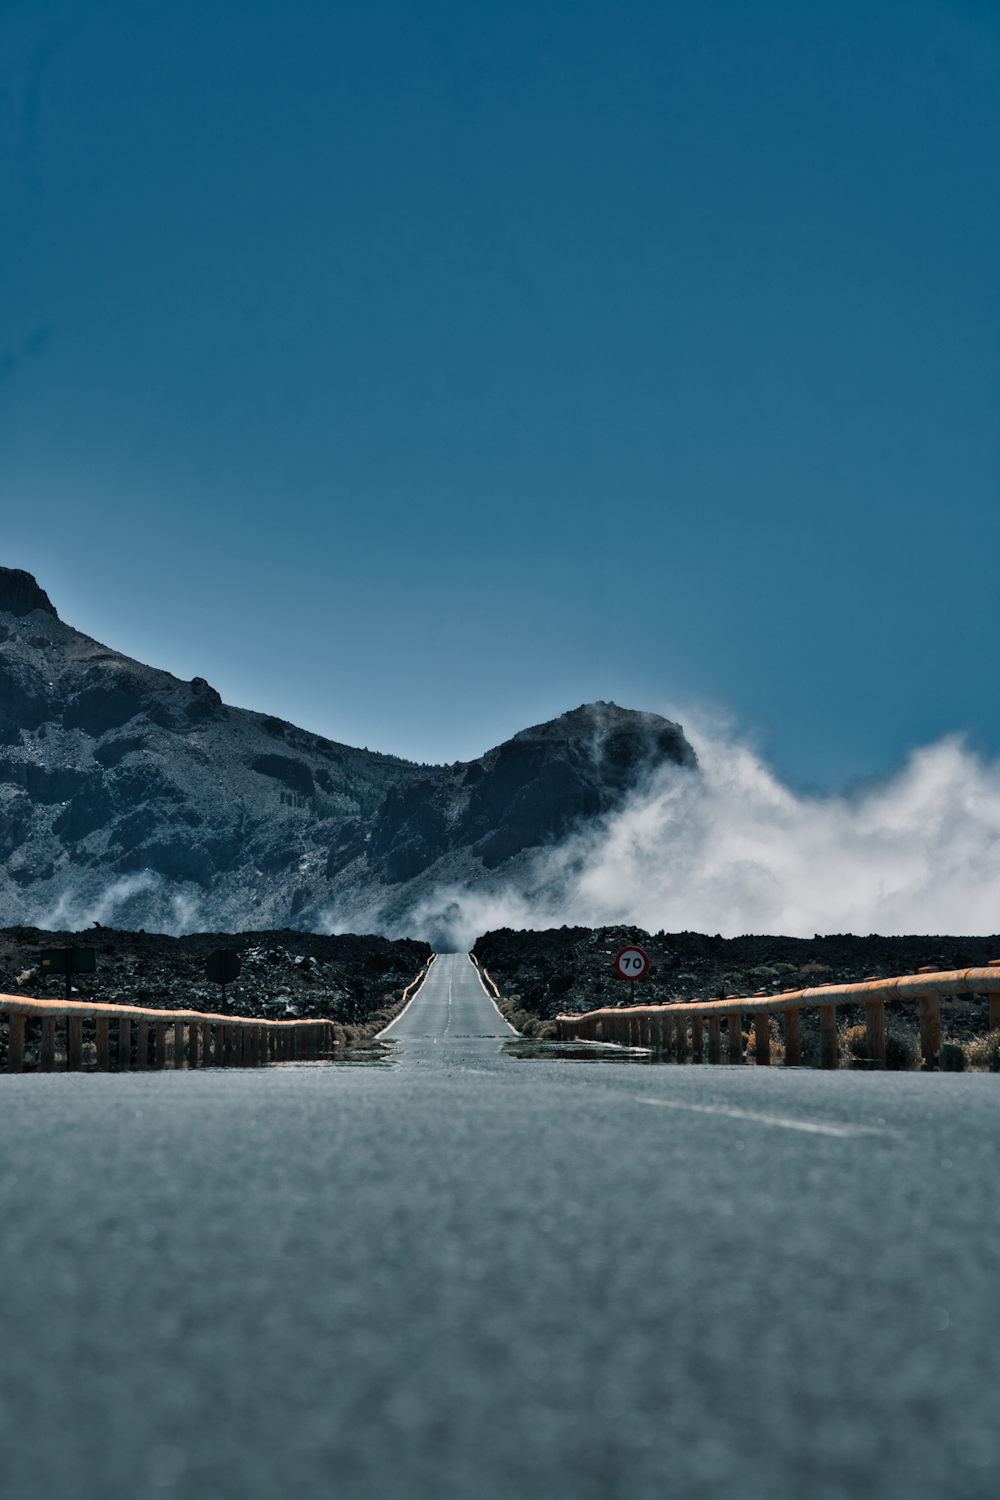 a view of a road with mountains in the background